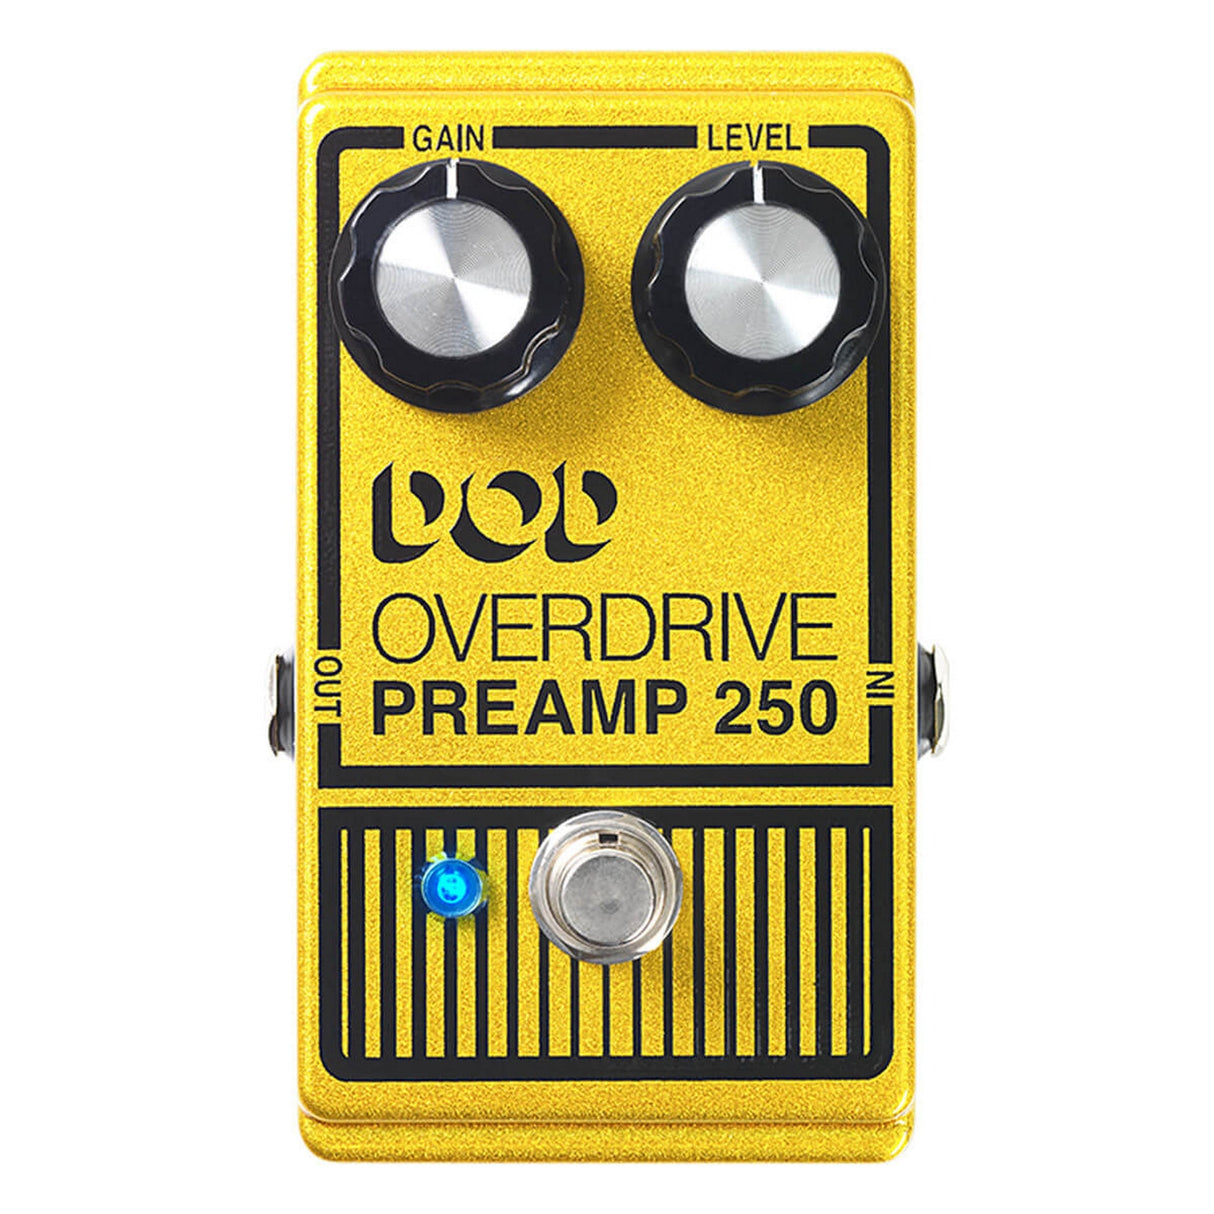 DigiTech DOD Overdrive Preamp 250 Guitar Effects Pedal with True Bypass and 9V